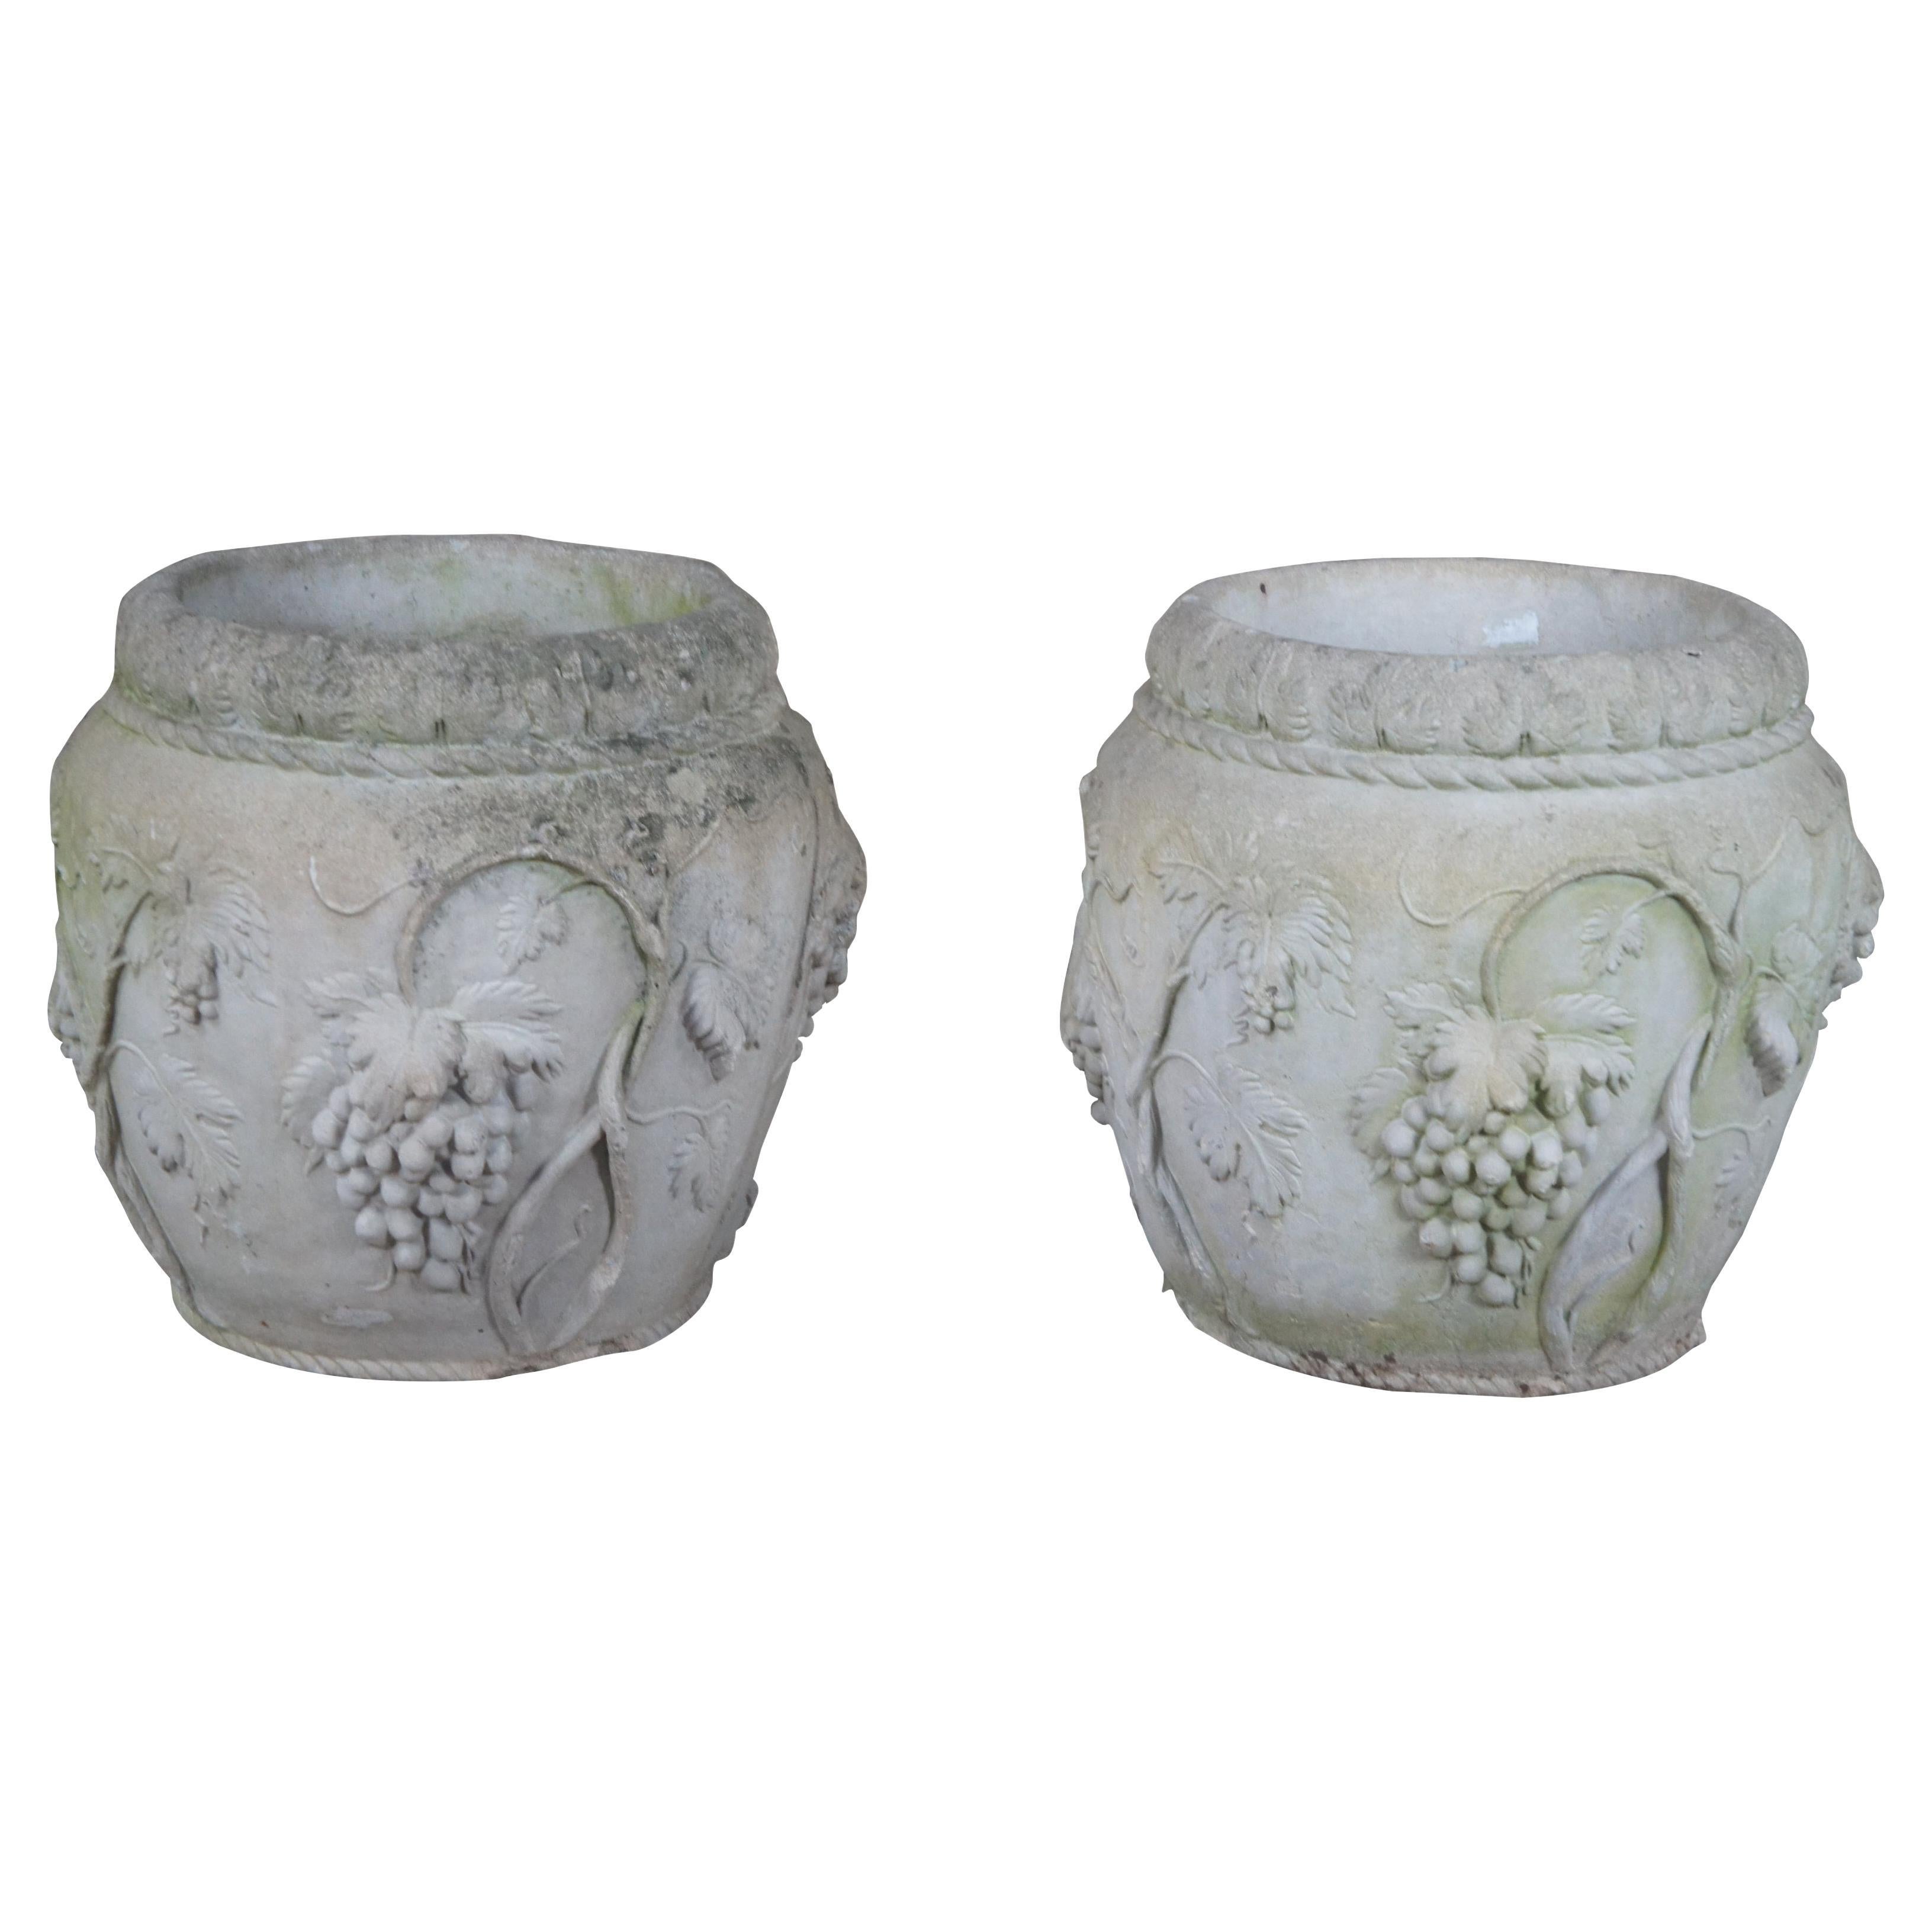 2 French Neoclassical High Relief Grapevine Garden Planter Vases Urns 135lbs For Sale